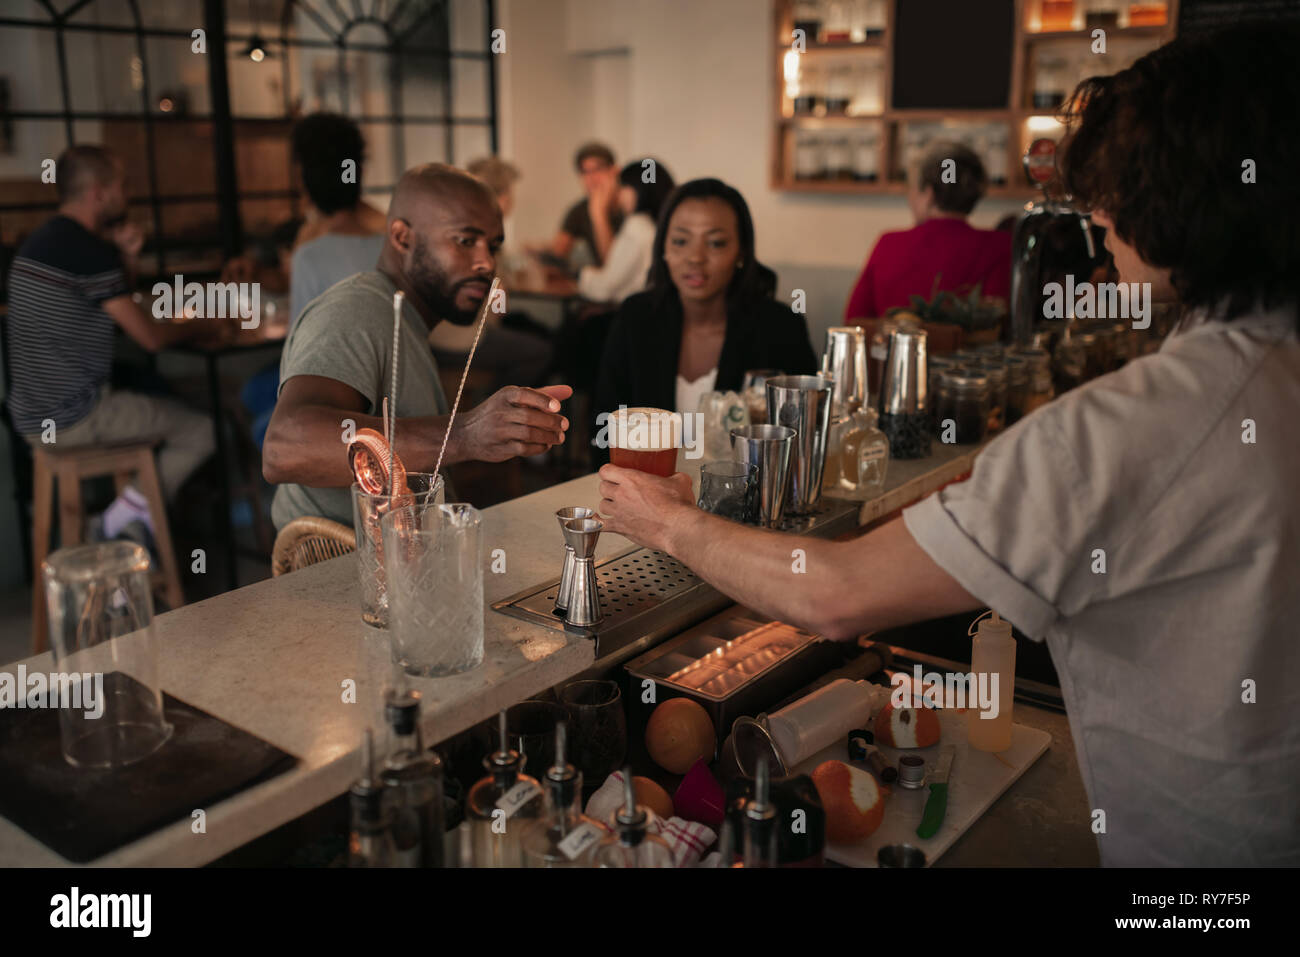 Young couple having drinks at a bar in the evening Stock Photo